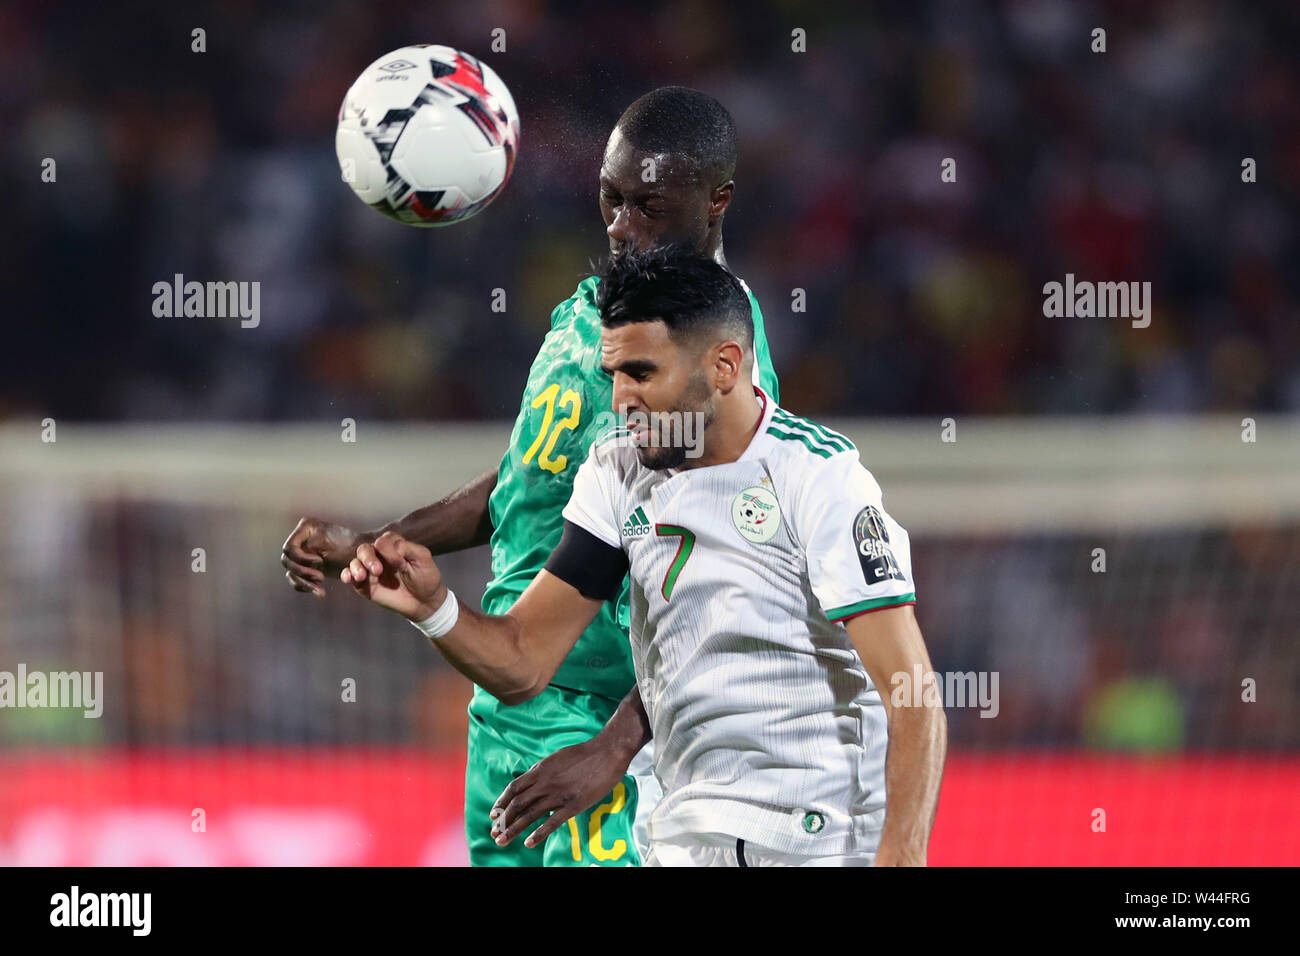 Cairo. 19th July, 2019. Algeria's Riyad Mahrez (R) vies with Senegal's Youssouf Sabaly during the 2019 Africa Cup of Nations final match between Senegal and Algeria in Cairo, Egypt on July 19, 2019. Algeria won 1-0 and claimed the title. Credit: Ahmed Gomaa/Xinhua/Alamy Live News Stock Photo